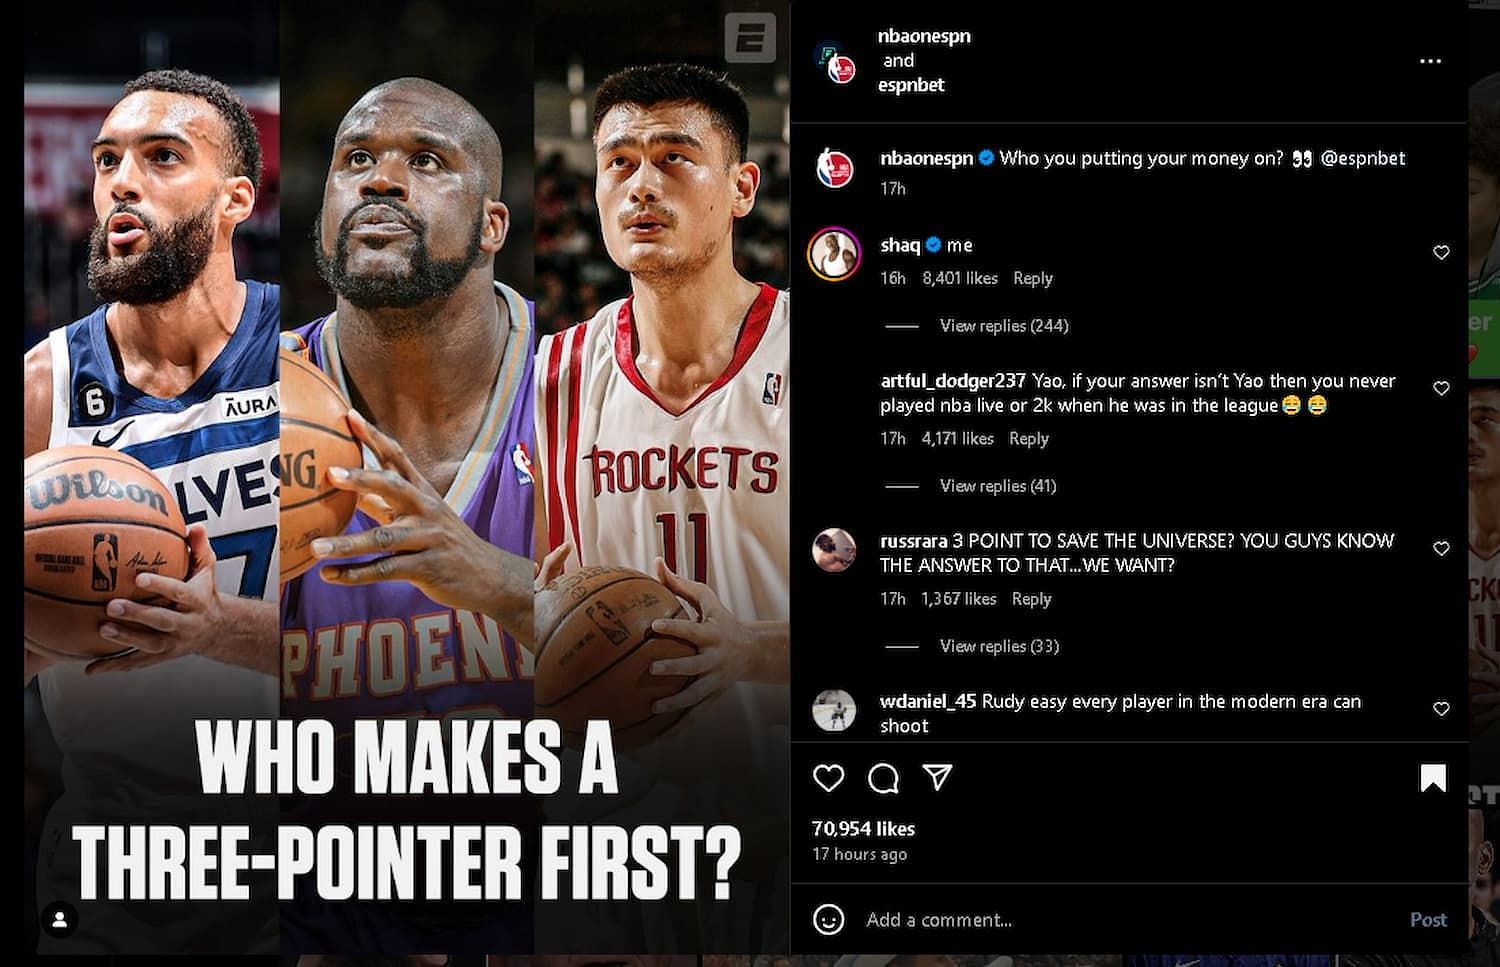 Shaquille O&#039;Neal says he&#039;ll make a 3-pointer first over Yao Ming and Rudy Gobert